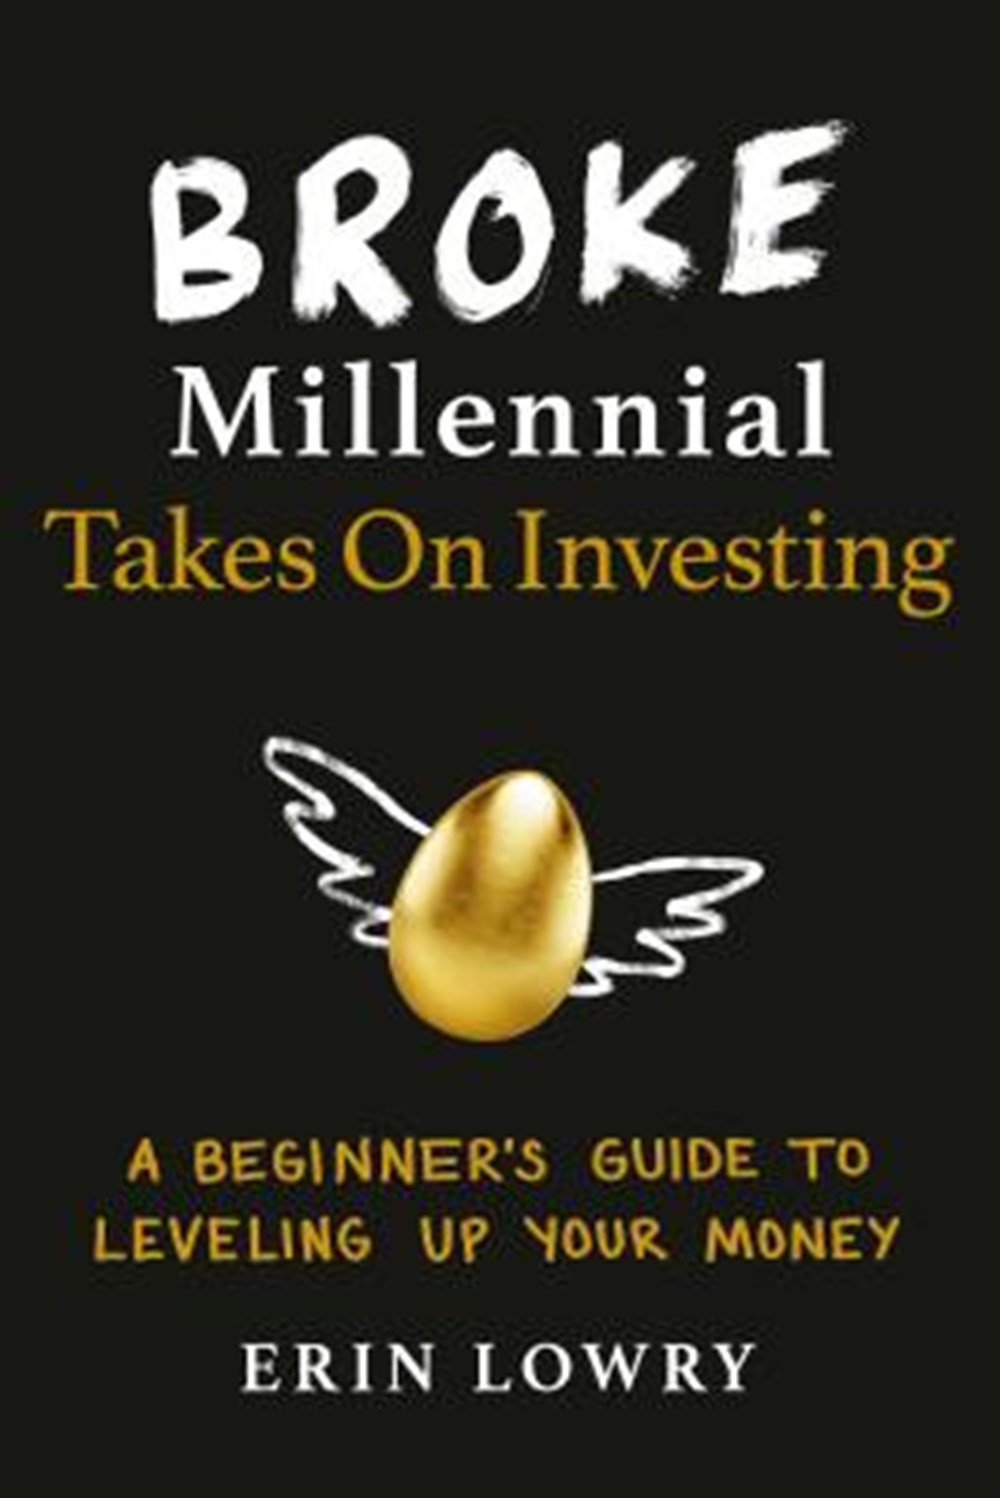 Broke Millennial Takes on Investing A Beginner's Guide to Leveling Up Your Money